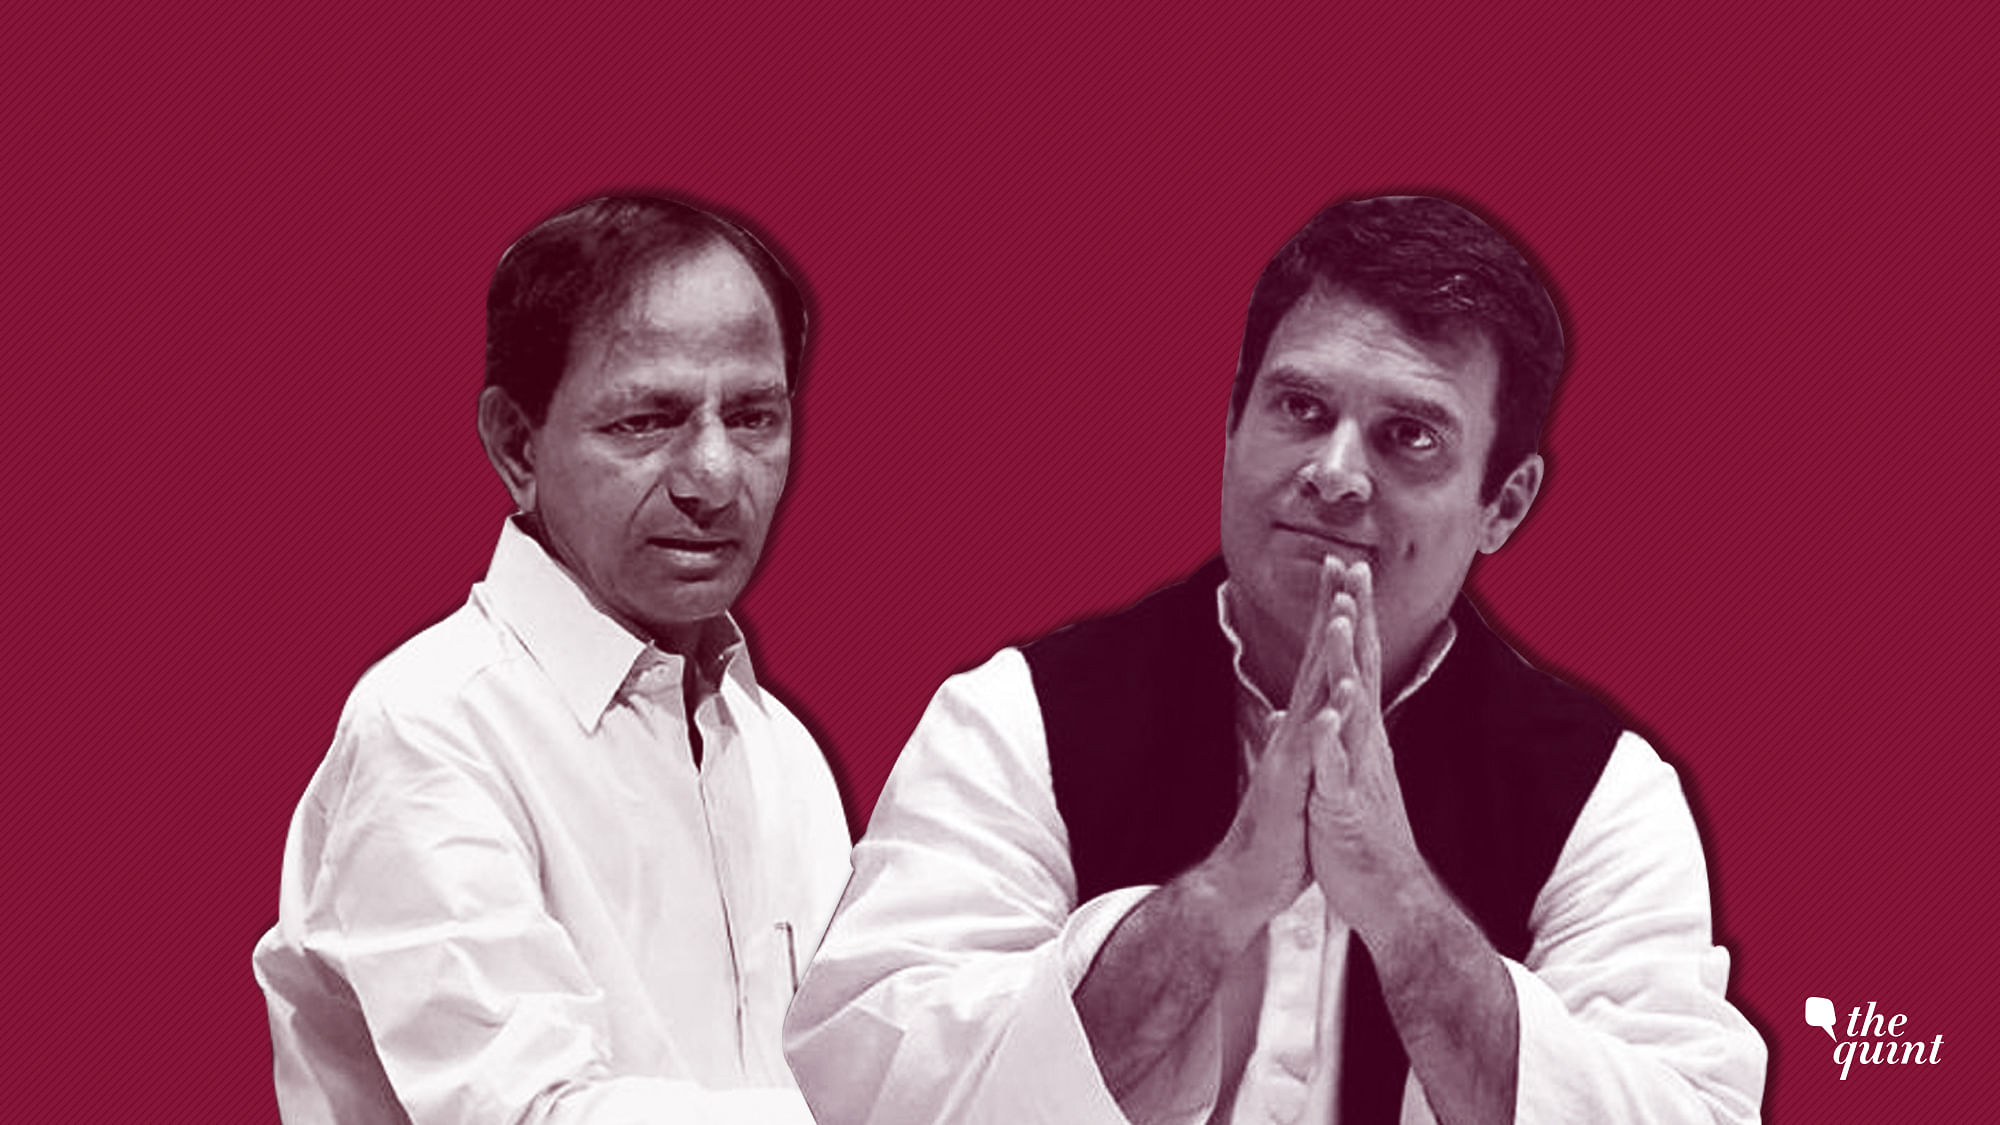 The Congress high command is likely to reach out to KCR to get the TRS’ support post the election.